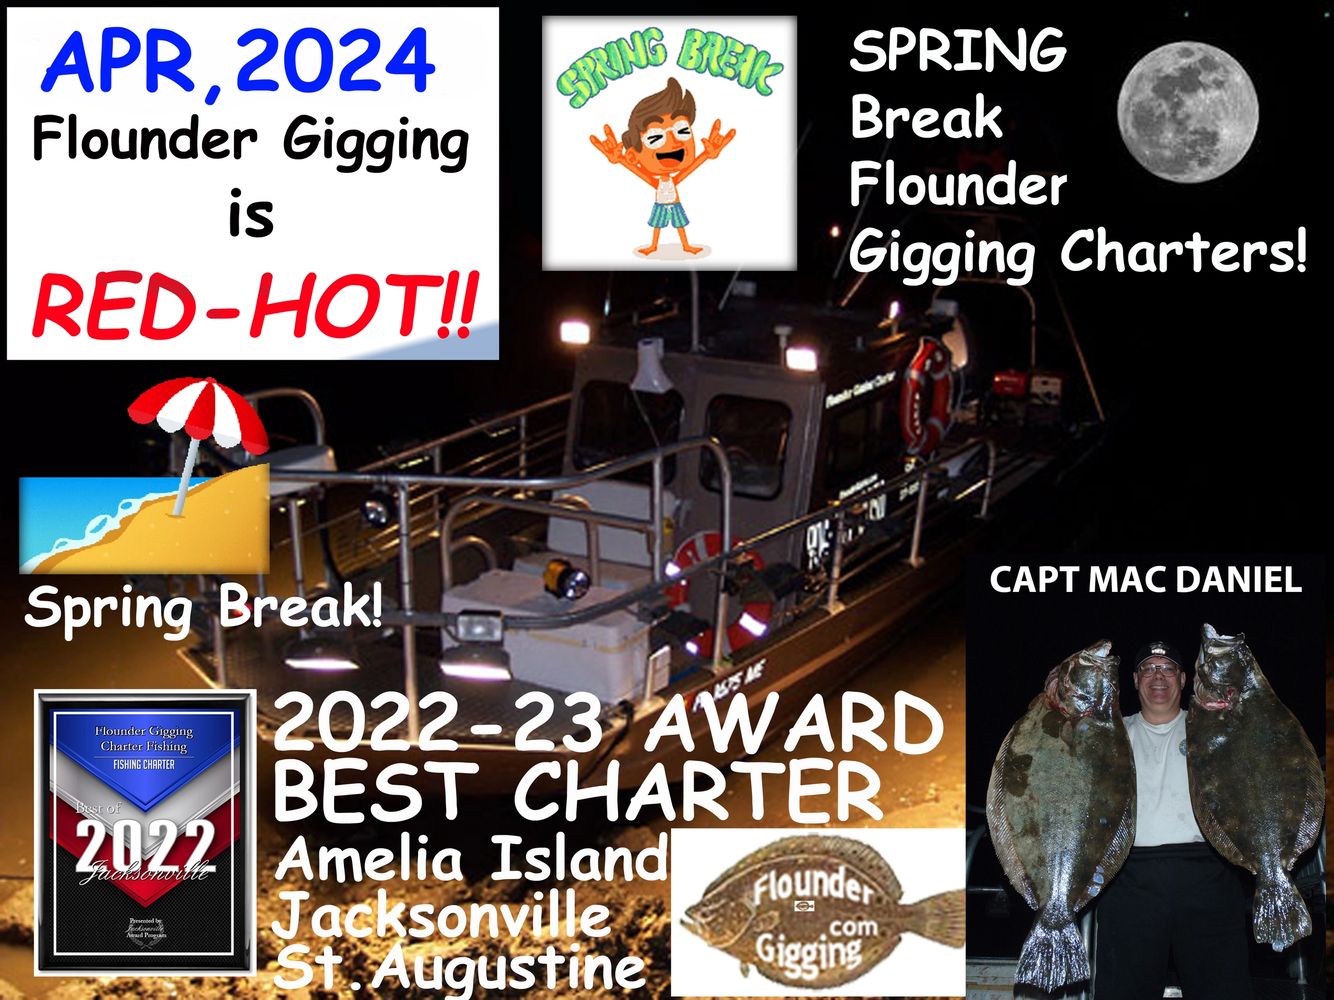 Our boat, the Flounder Barge, by the edge of the water in April, 2024. Text us at 904-556-0230.